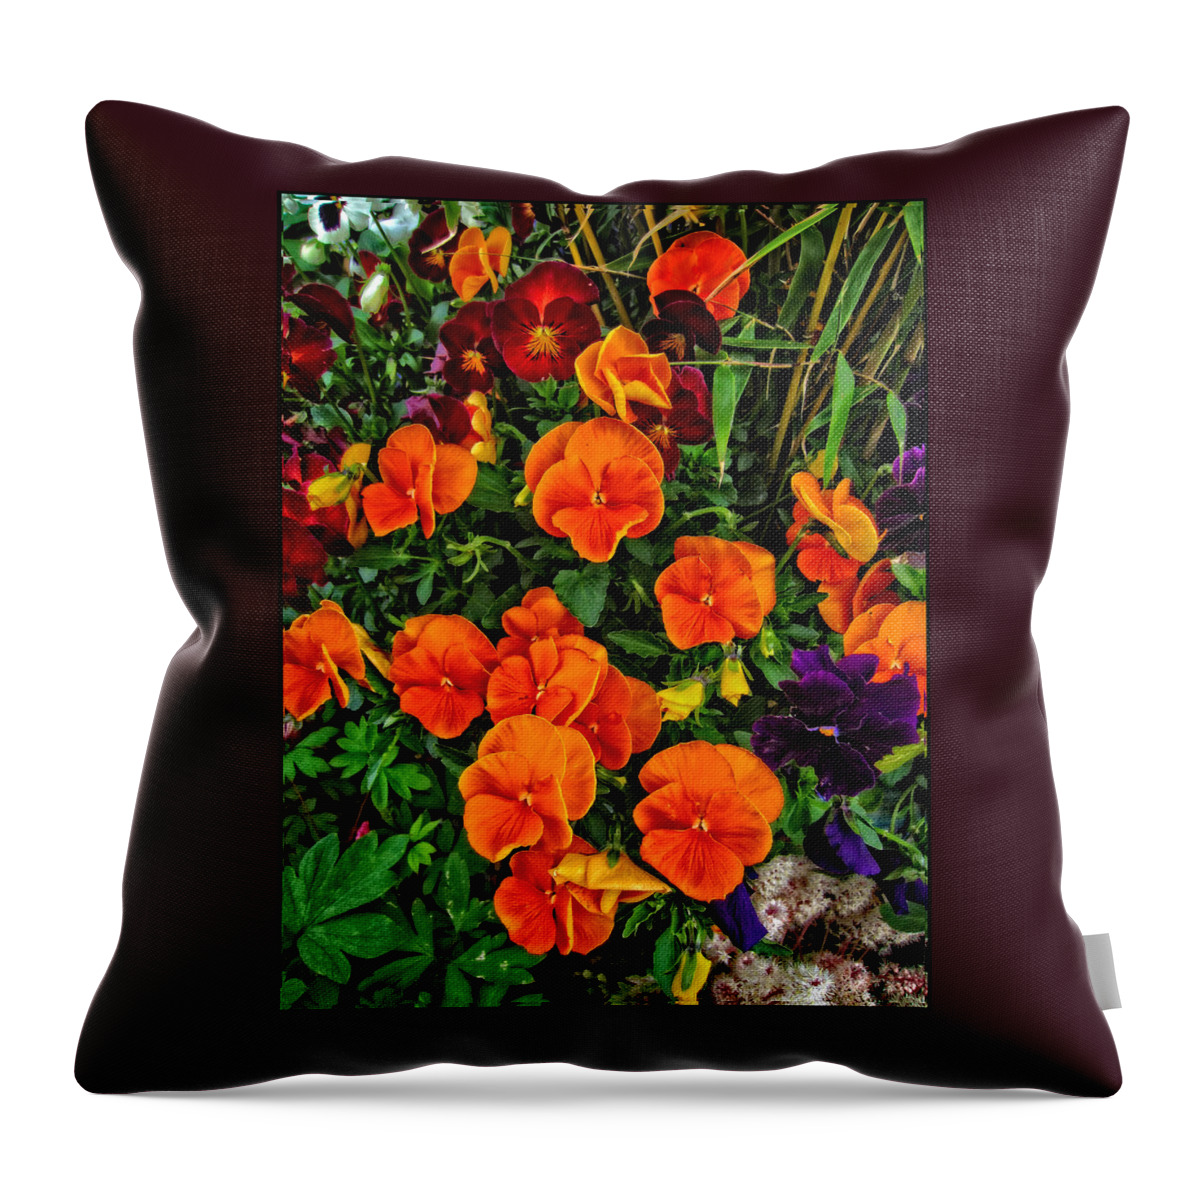 Floral Wall Art Throw Pillow featuring the photograph Fall Pansies by Thom Zehrfeld